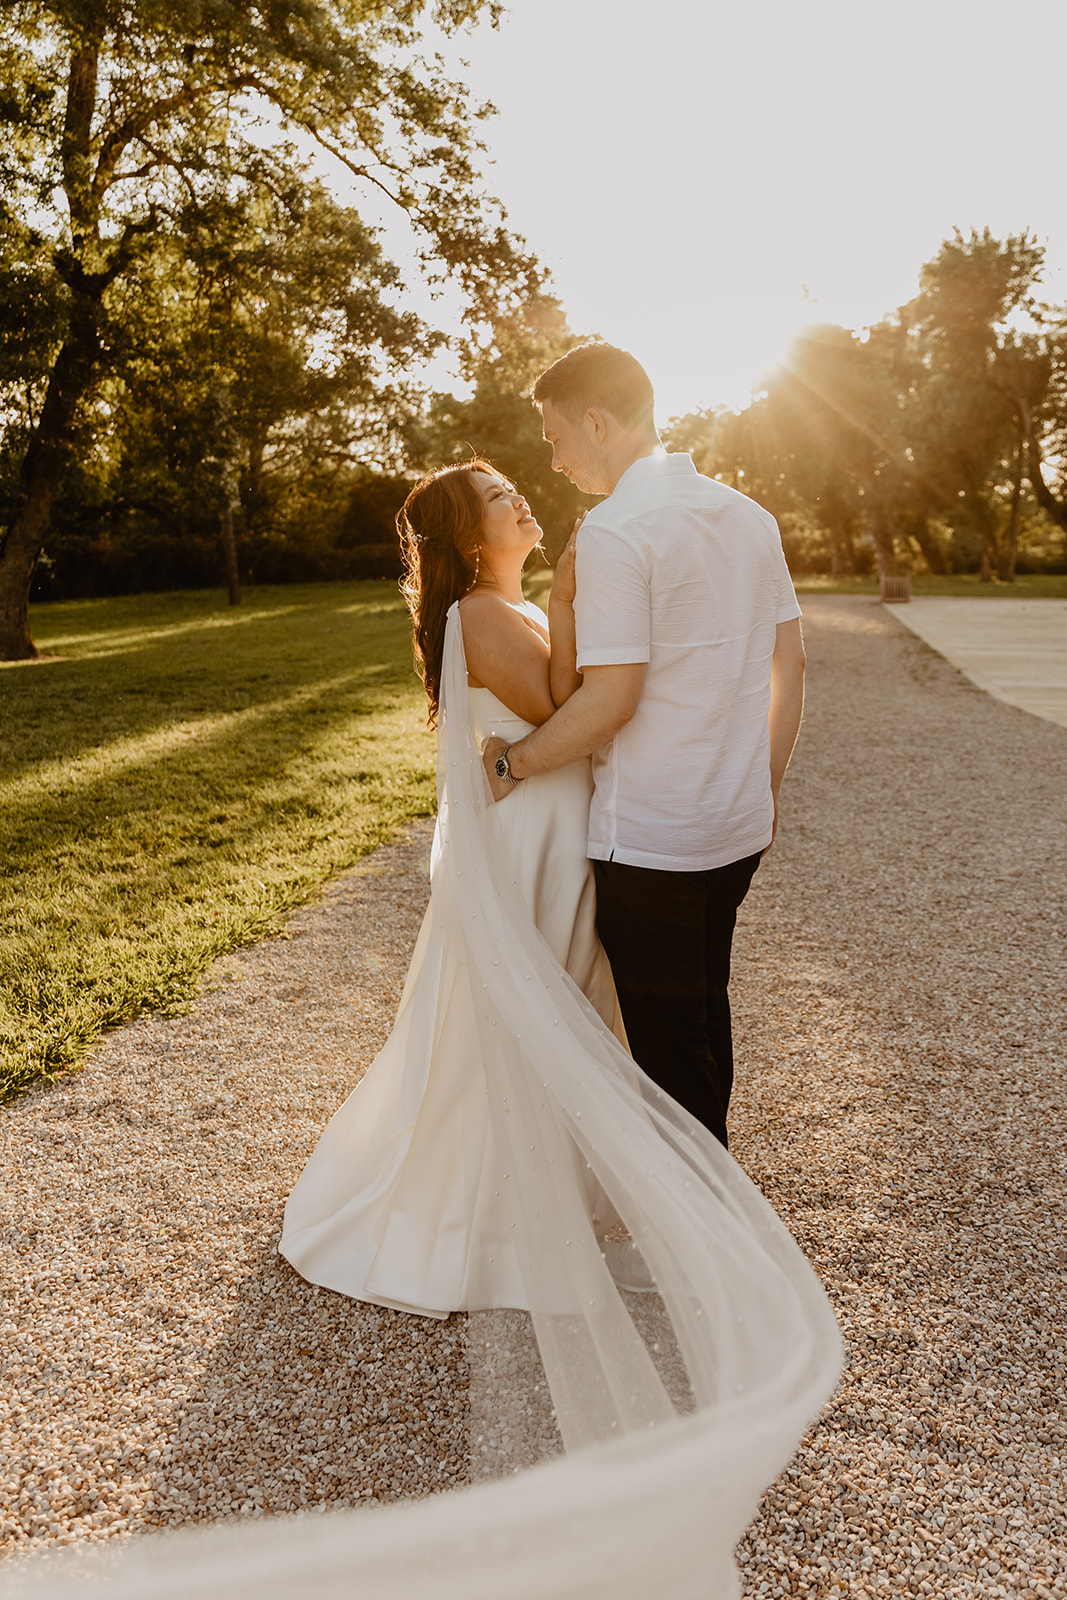 Bride and groom at golden hour at a Destination Wedding in France. Photography & Videography by OliveJoy Photography